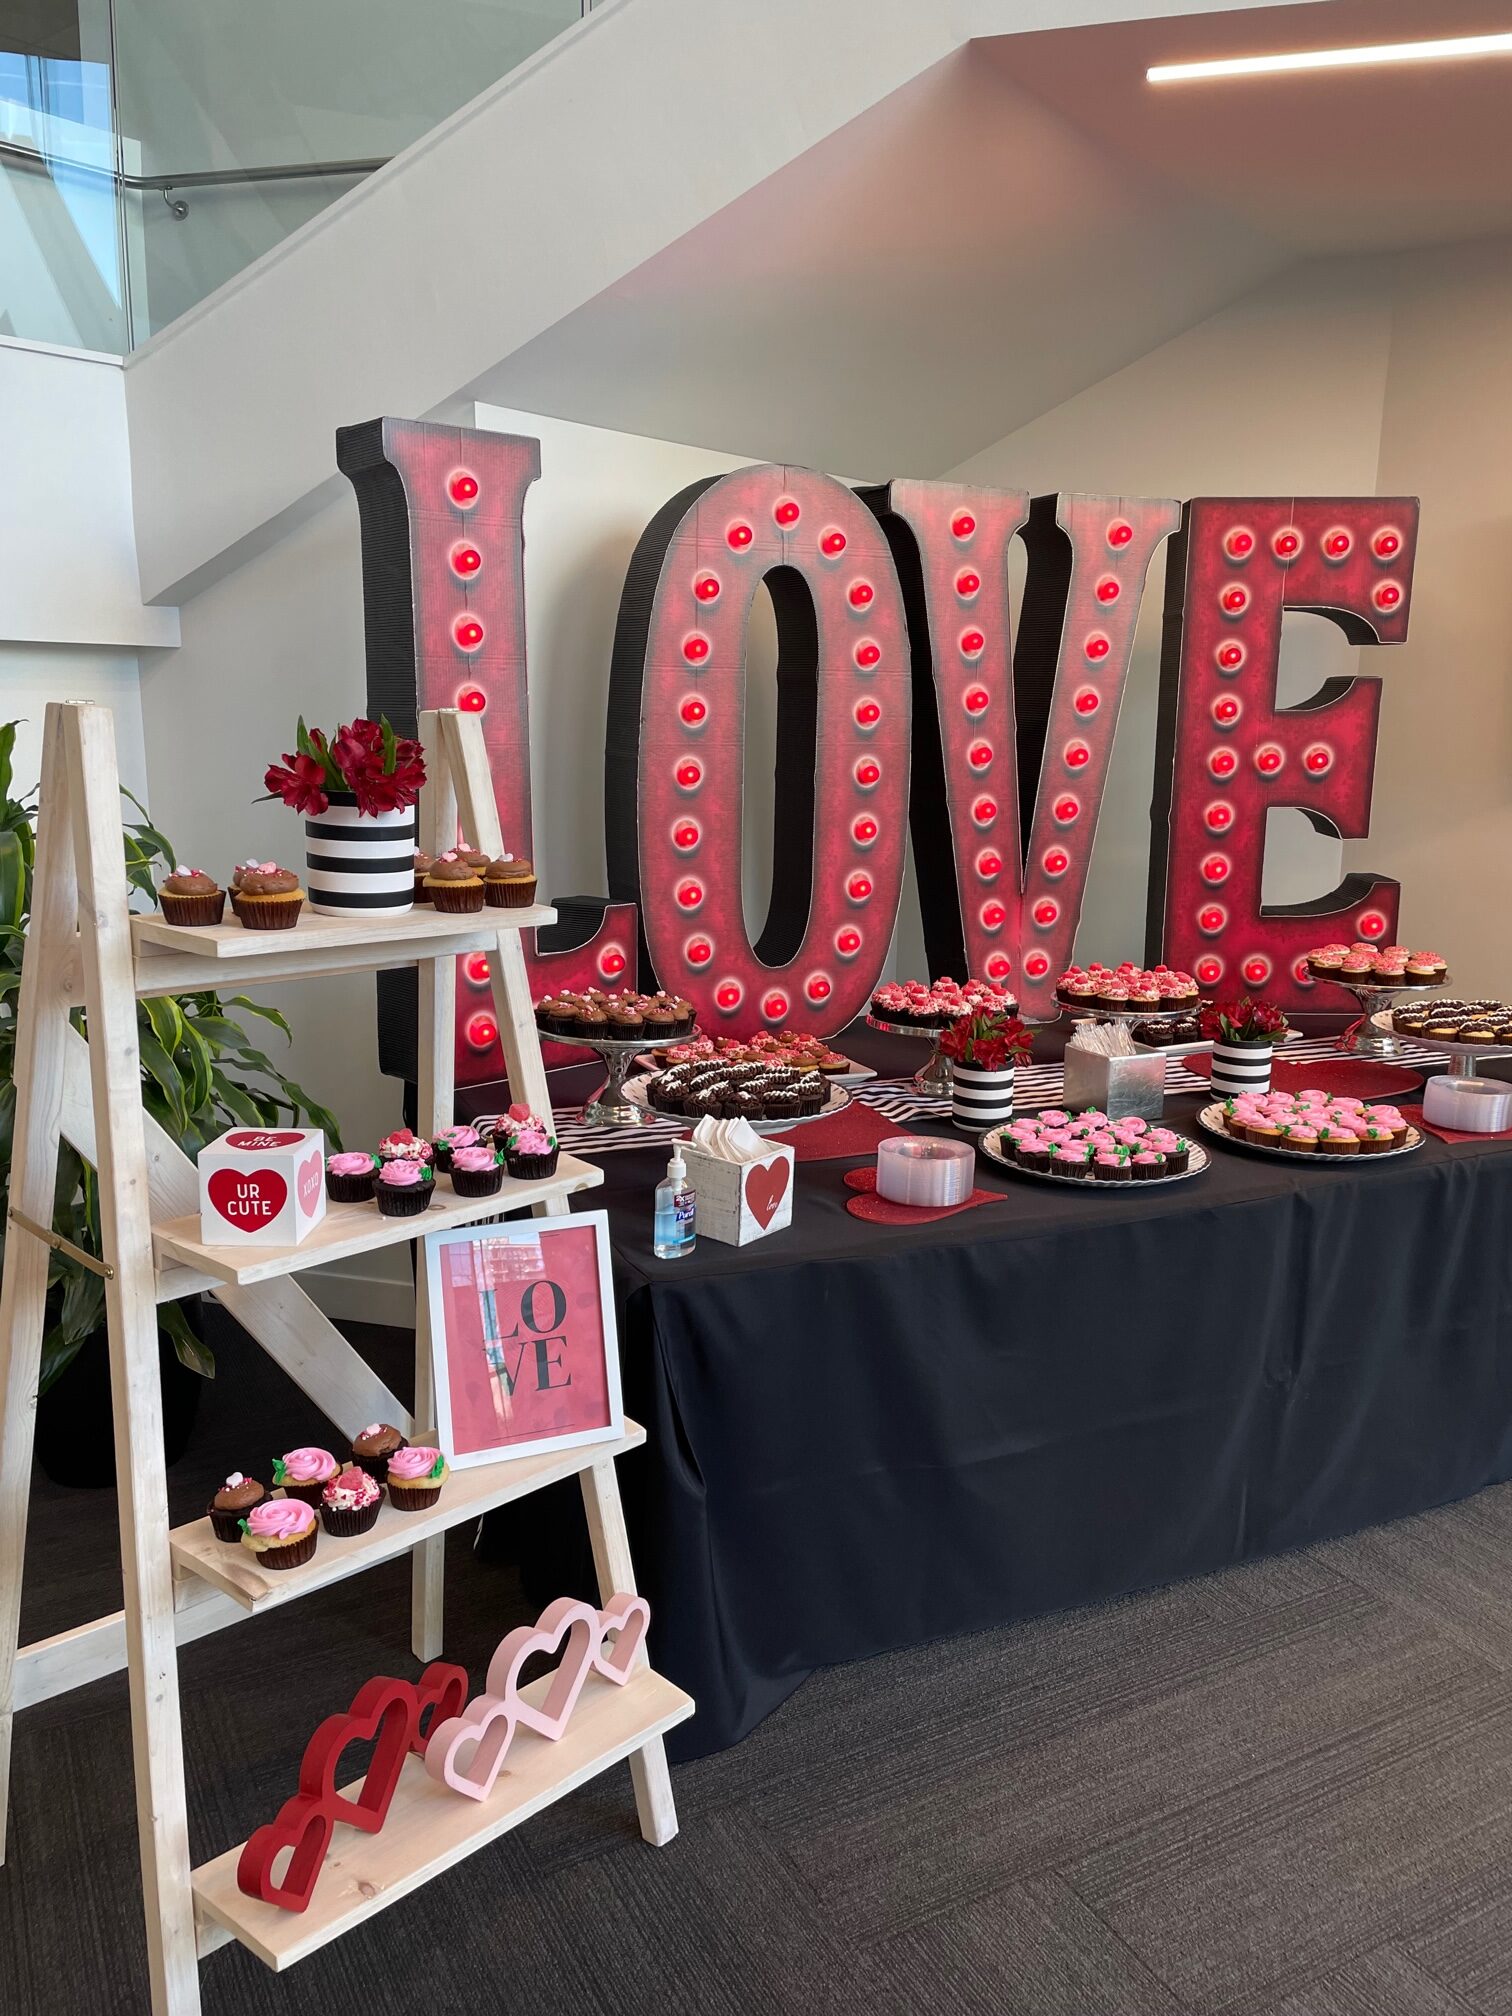 Skyline Events and Socials Valentine Themed Large Decor Love in Lights